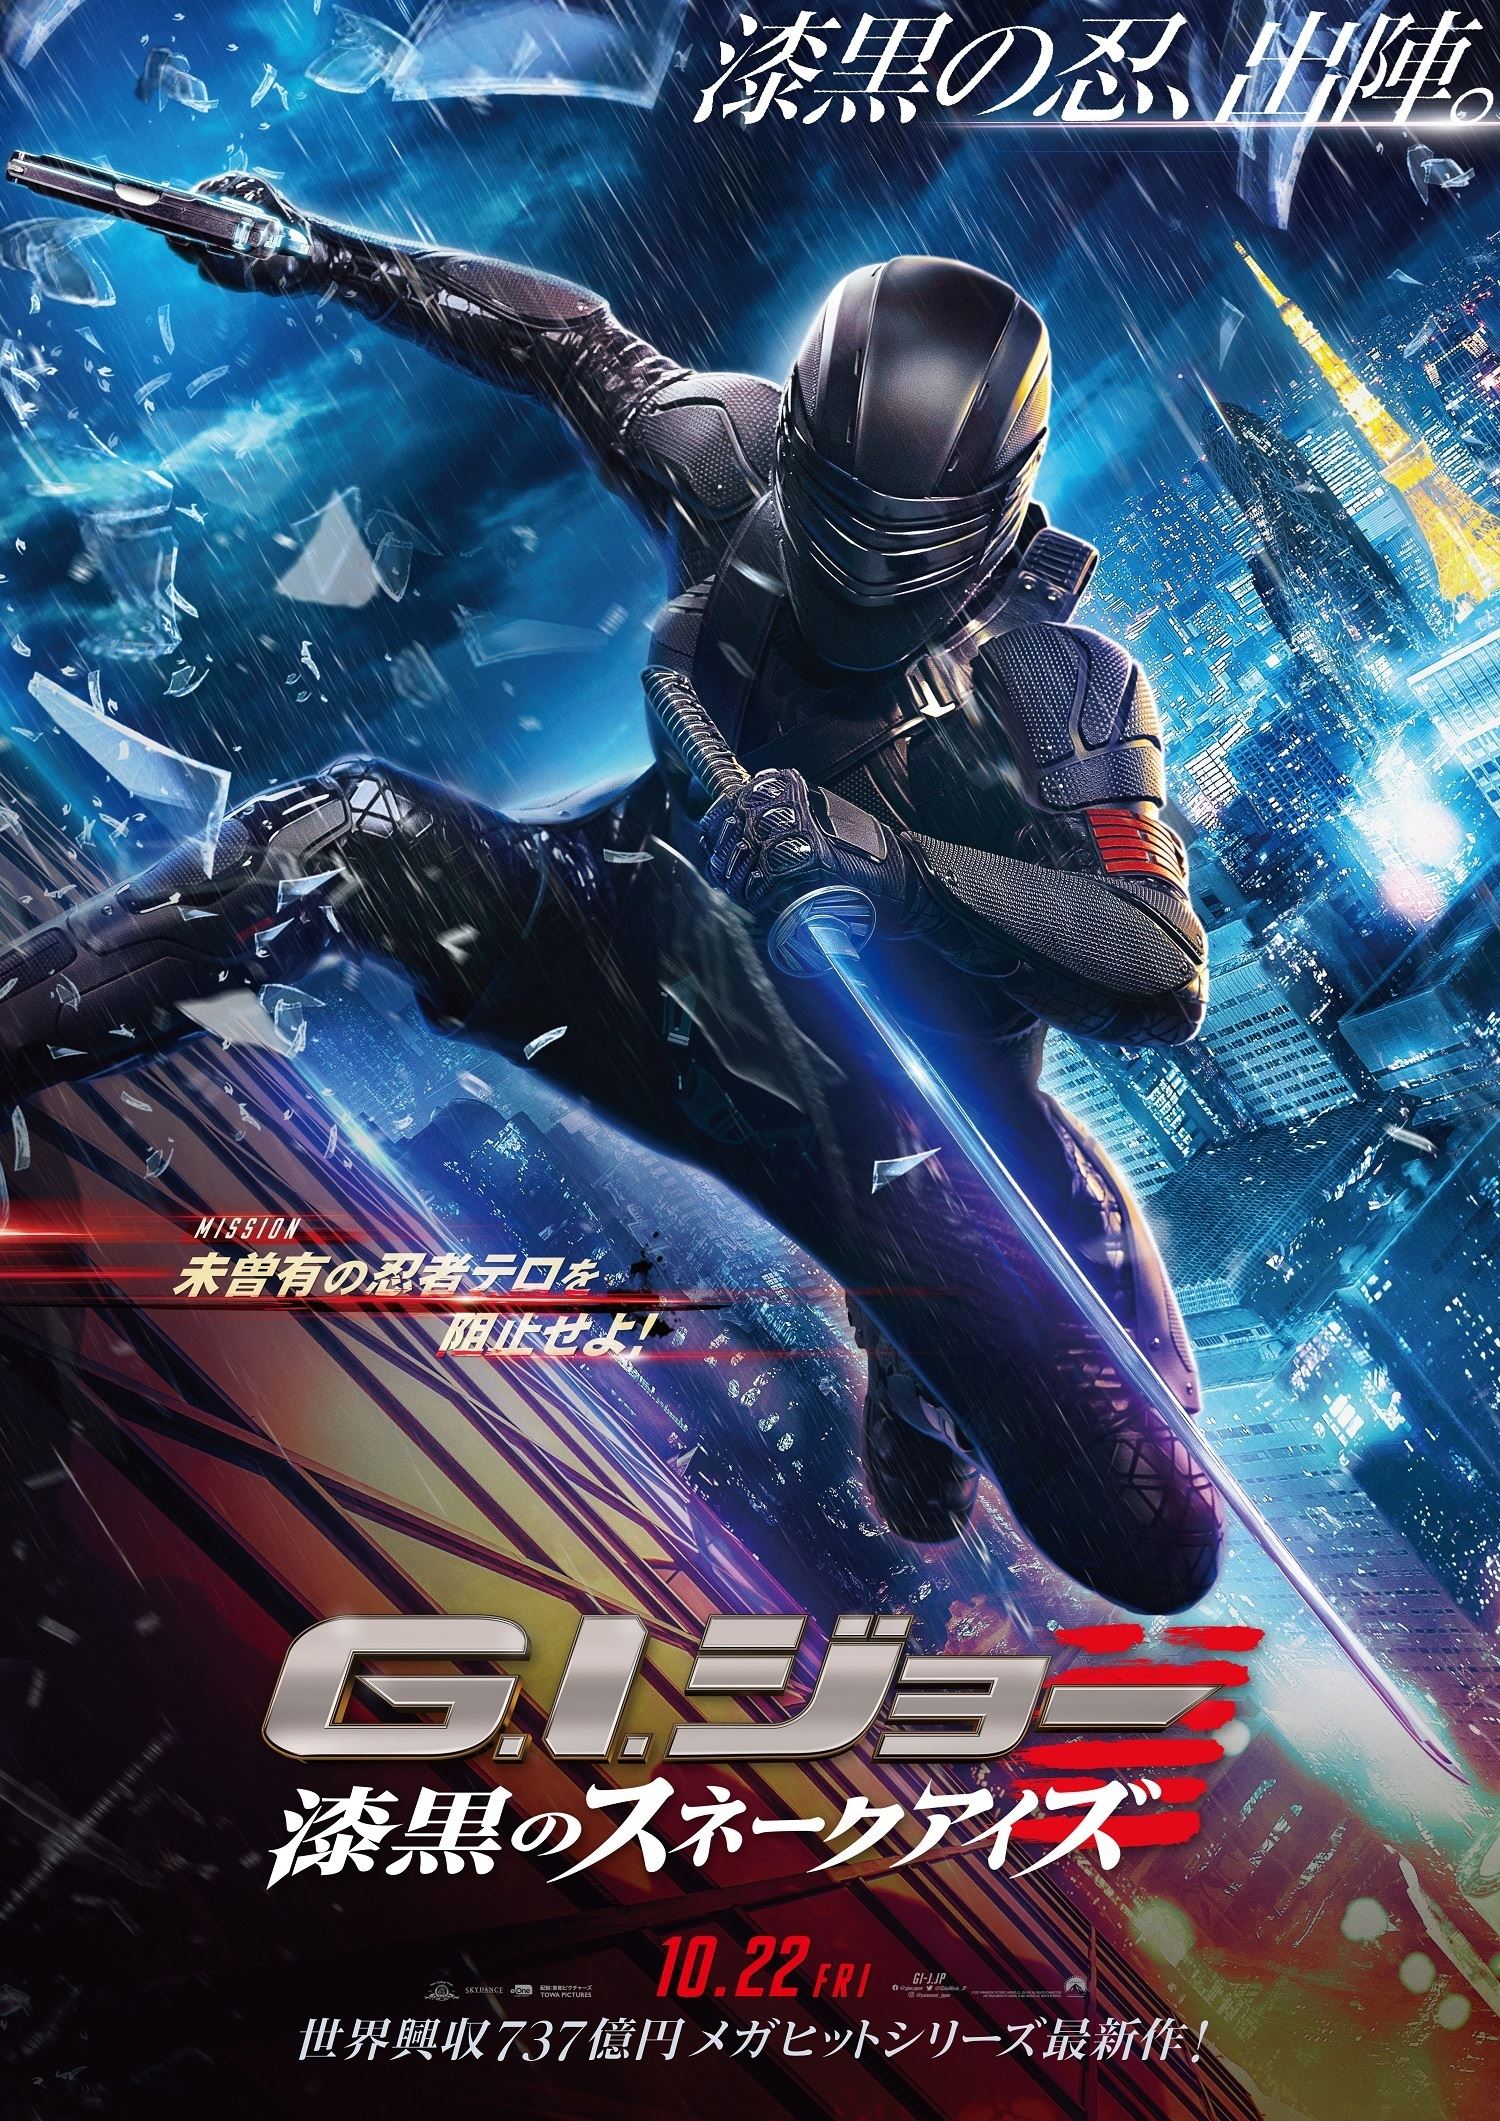 『G.I.ジョー：漆黒のスネークアイズ』日本版ポスター (c)2021 Paramount Pictures. Hasbro, G.I. Joe and all related characters are trademarks of Hasbro. (C) 2021 Hasbro. All Rights Reserved.